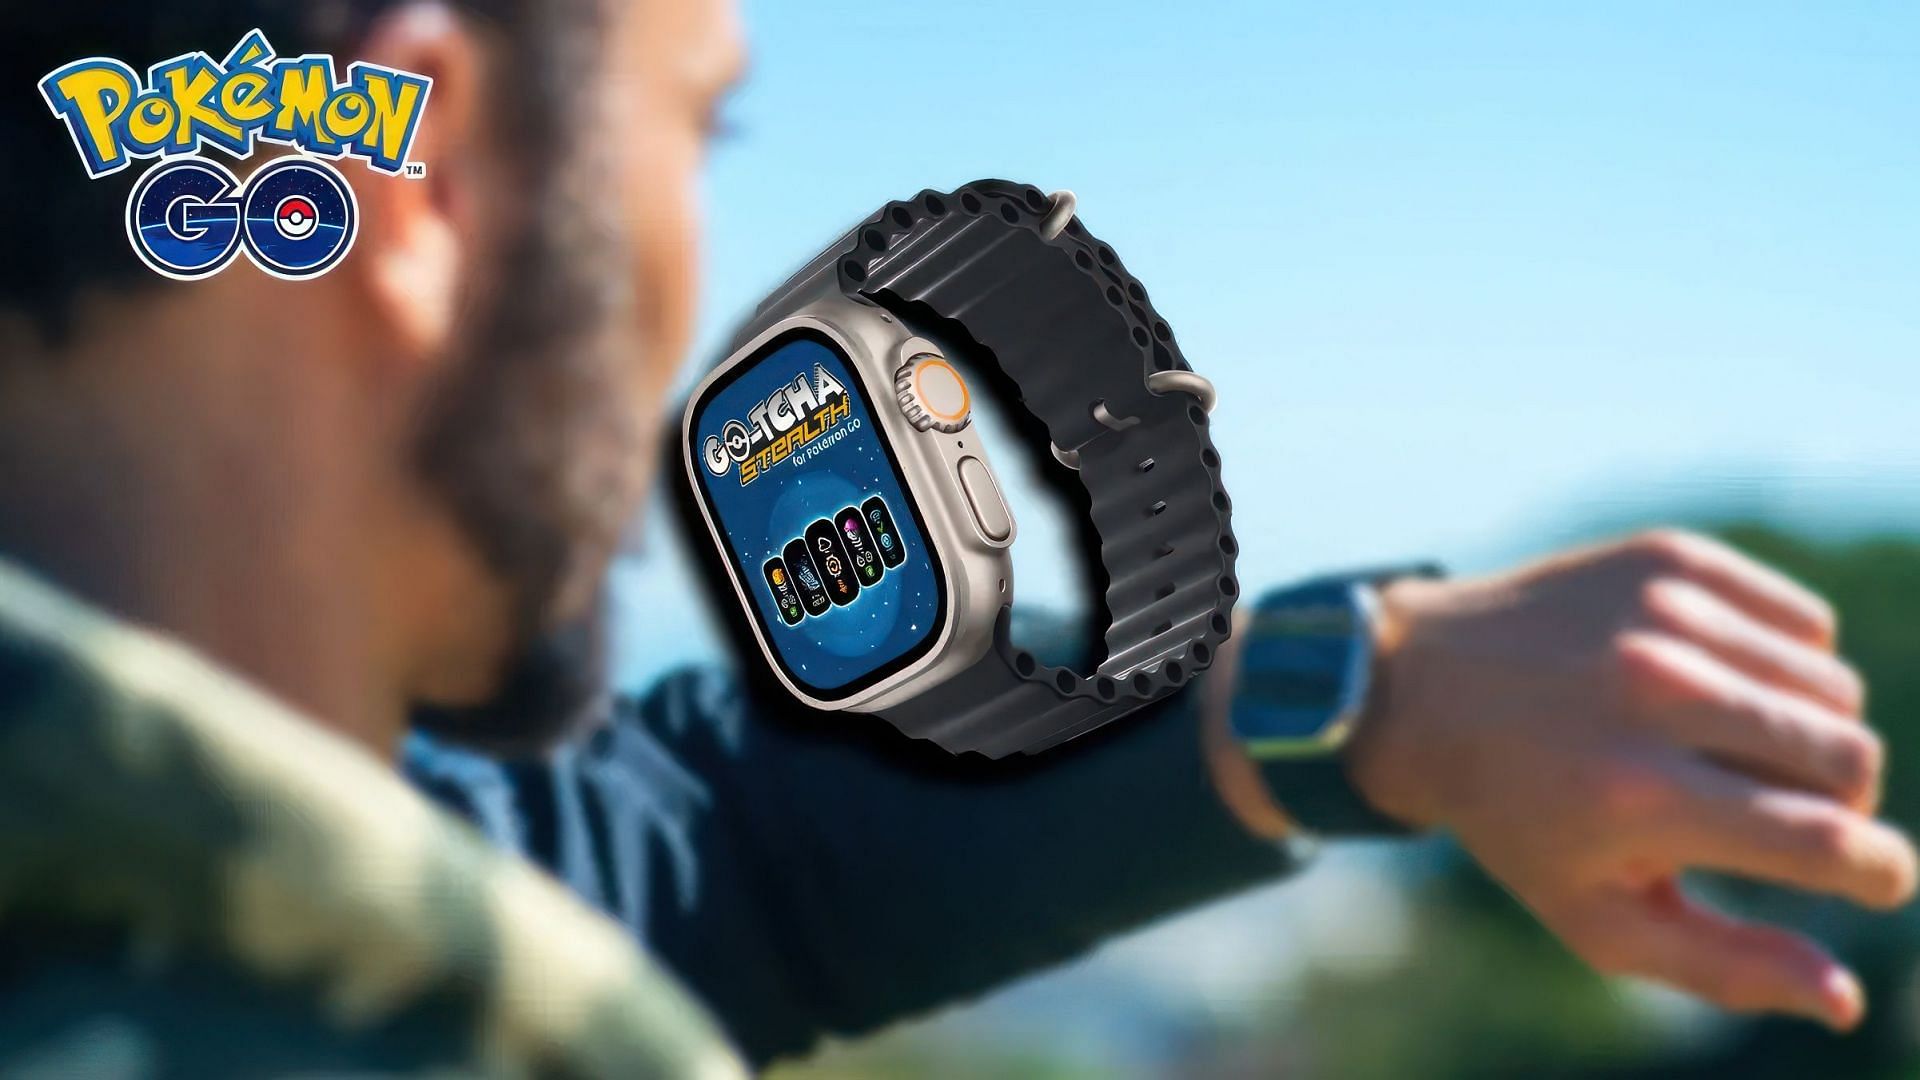 Top 10 Pokemon GO Catch 'Em All Bluetooth Watches You Need for Your Pokemon  Hunting! | Tech Times